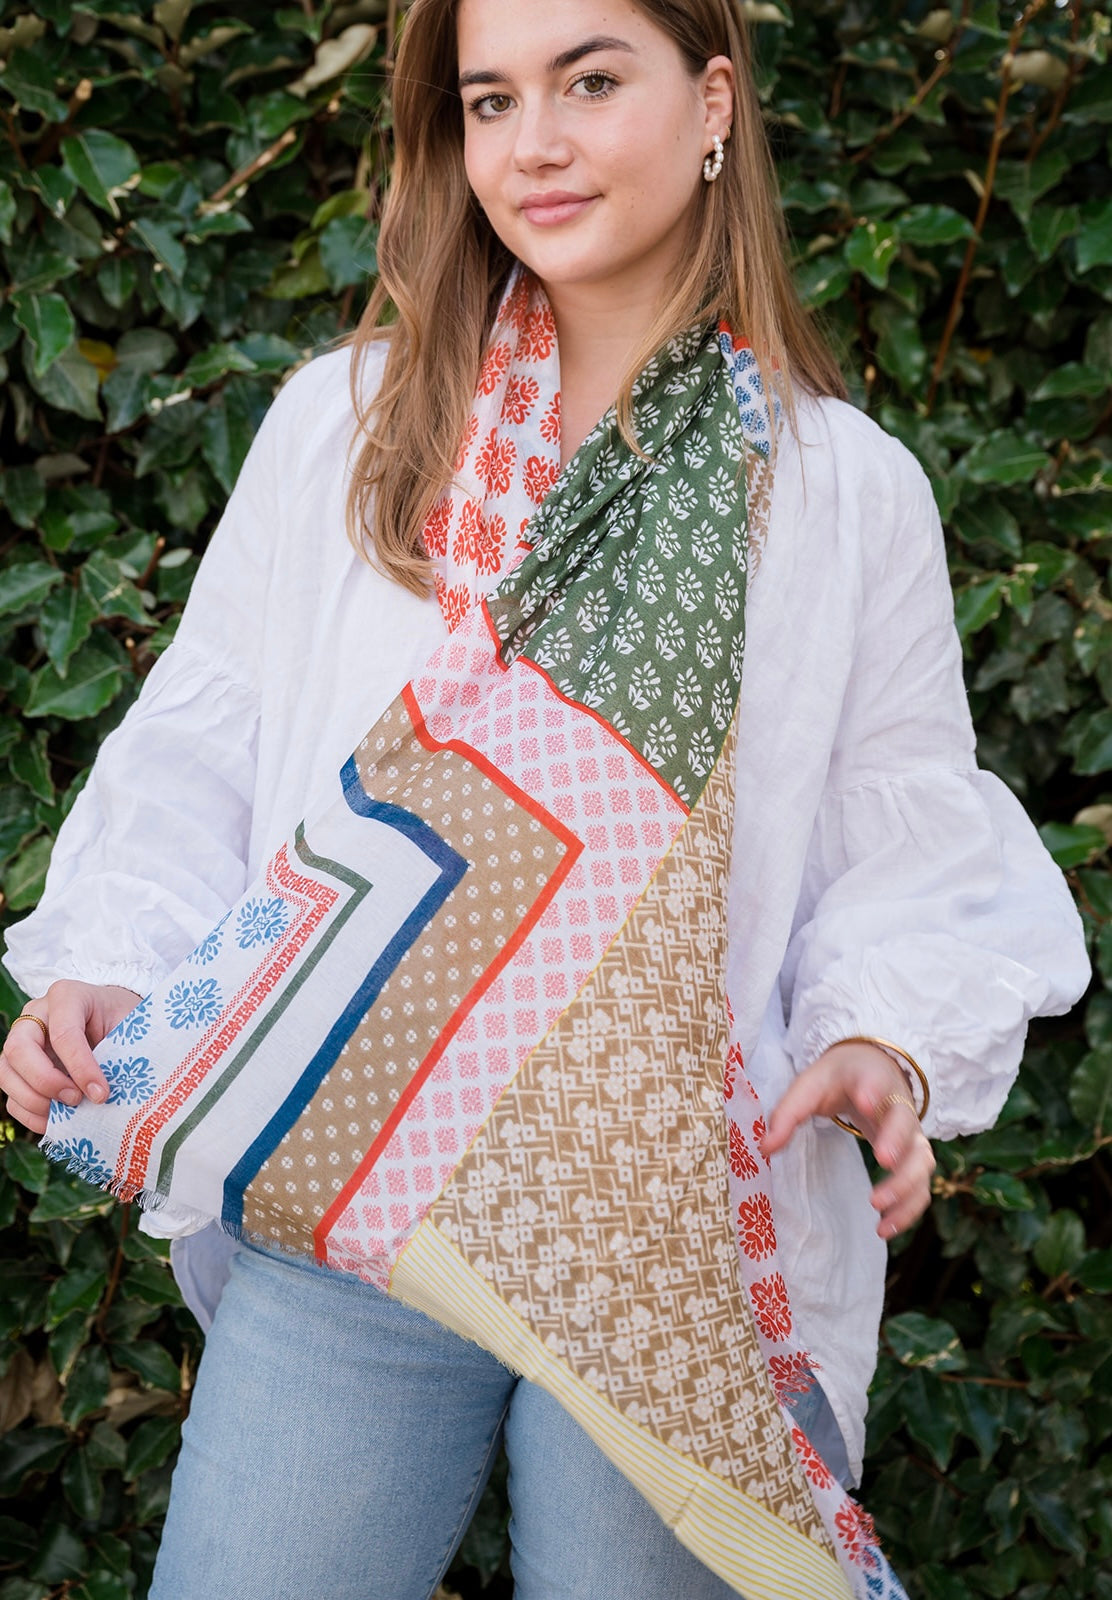 Elevate your style with our abstract scarf featuring a beautiful mosaic-like pattern in harmonious blues, greens, neutrals, and a pop of terracotta. The intricate design is complemented by frayed edges, giving it a relaxed and bohemian feel. The mix of cool and earthy tones creates a soothing and balanced look, making it perfect for any occasion. Crafted from a comfortable polyester blend.